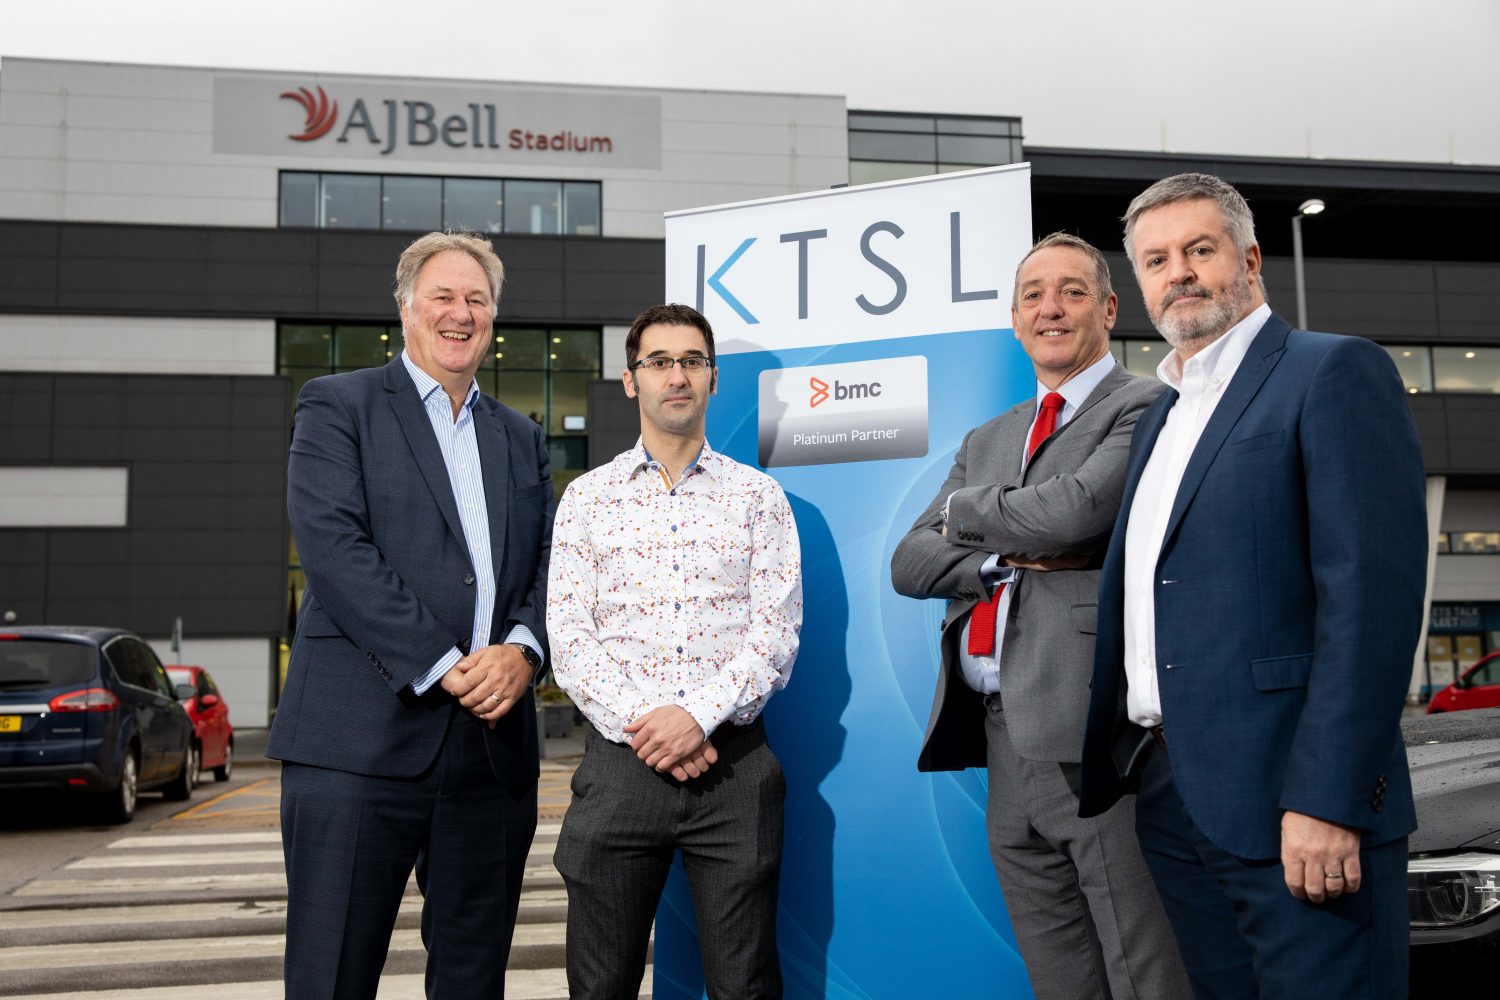 4 men stood outside of the AJ Bell Stadium with a KTSL pop up banner in the background